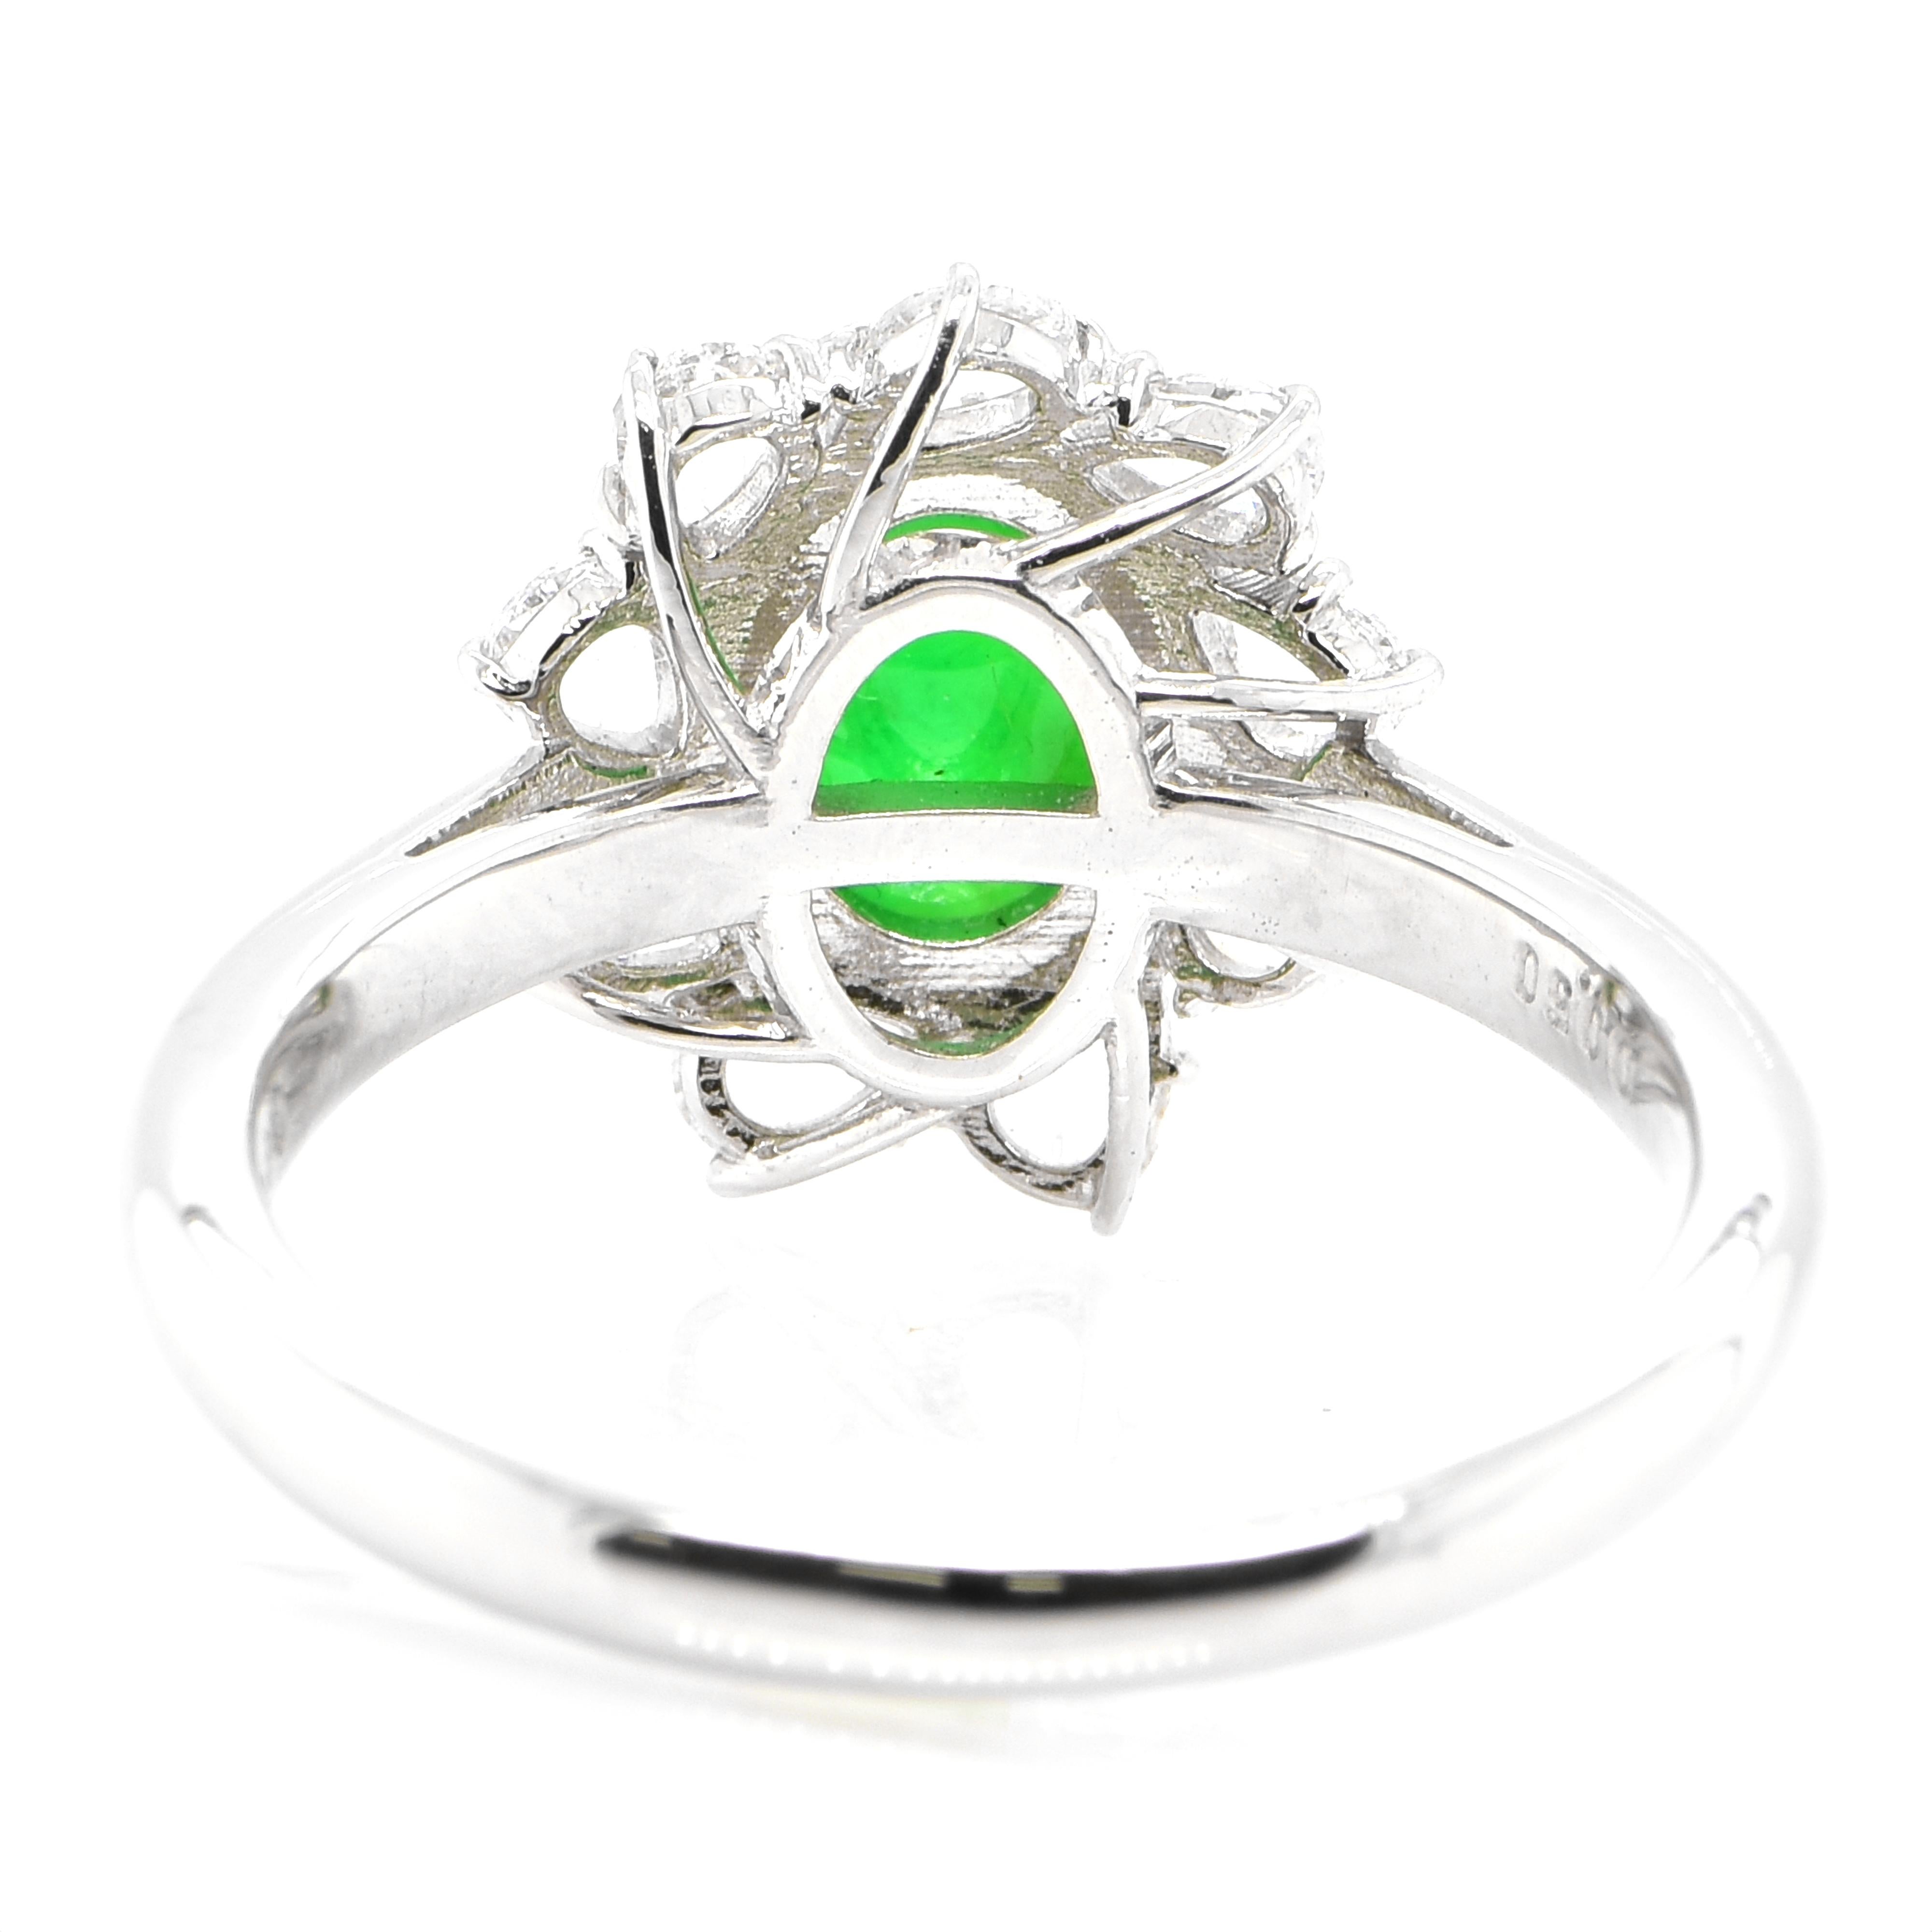 Women's 1.302 Carat Natural 'Type-A' Jadeite and Rose Cut Diamond Ring Set in Platinum For Sale